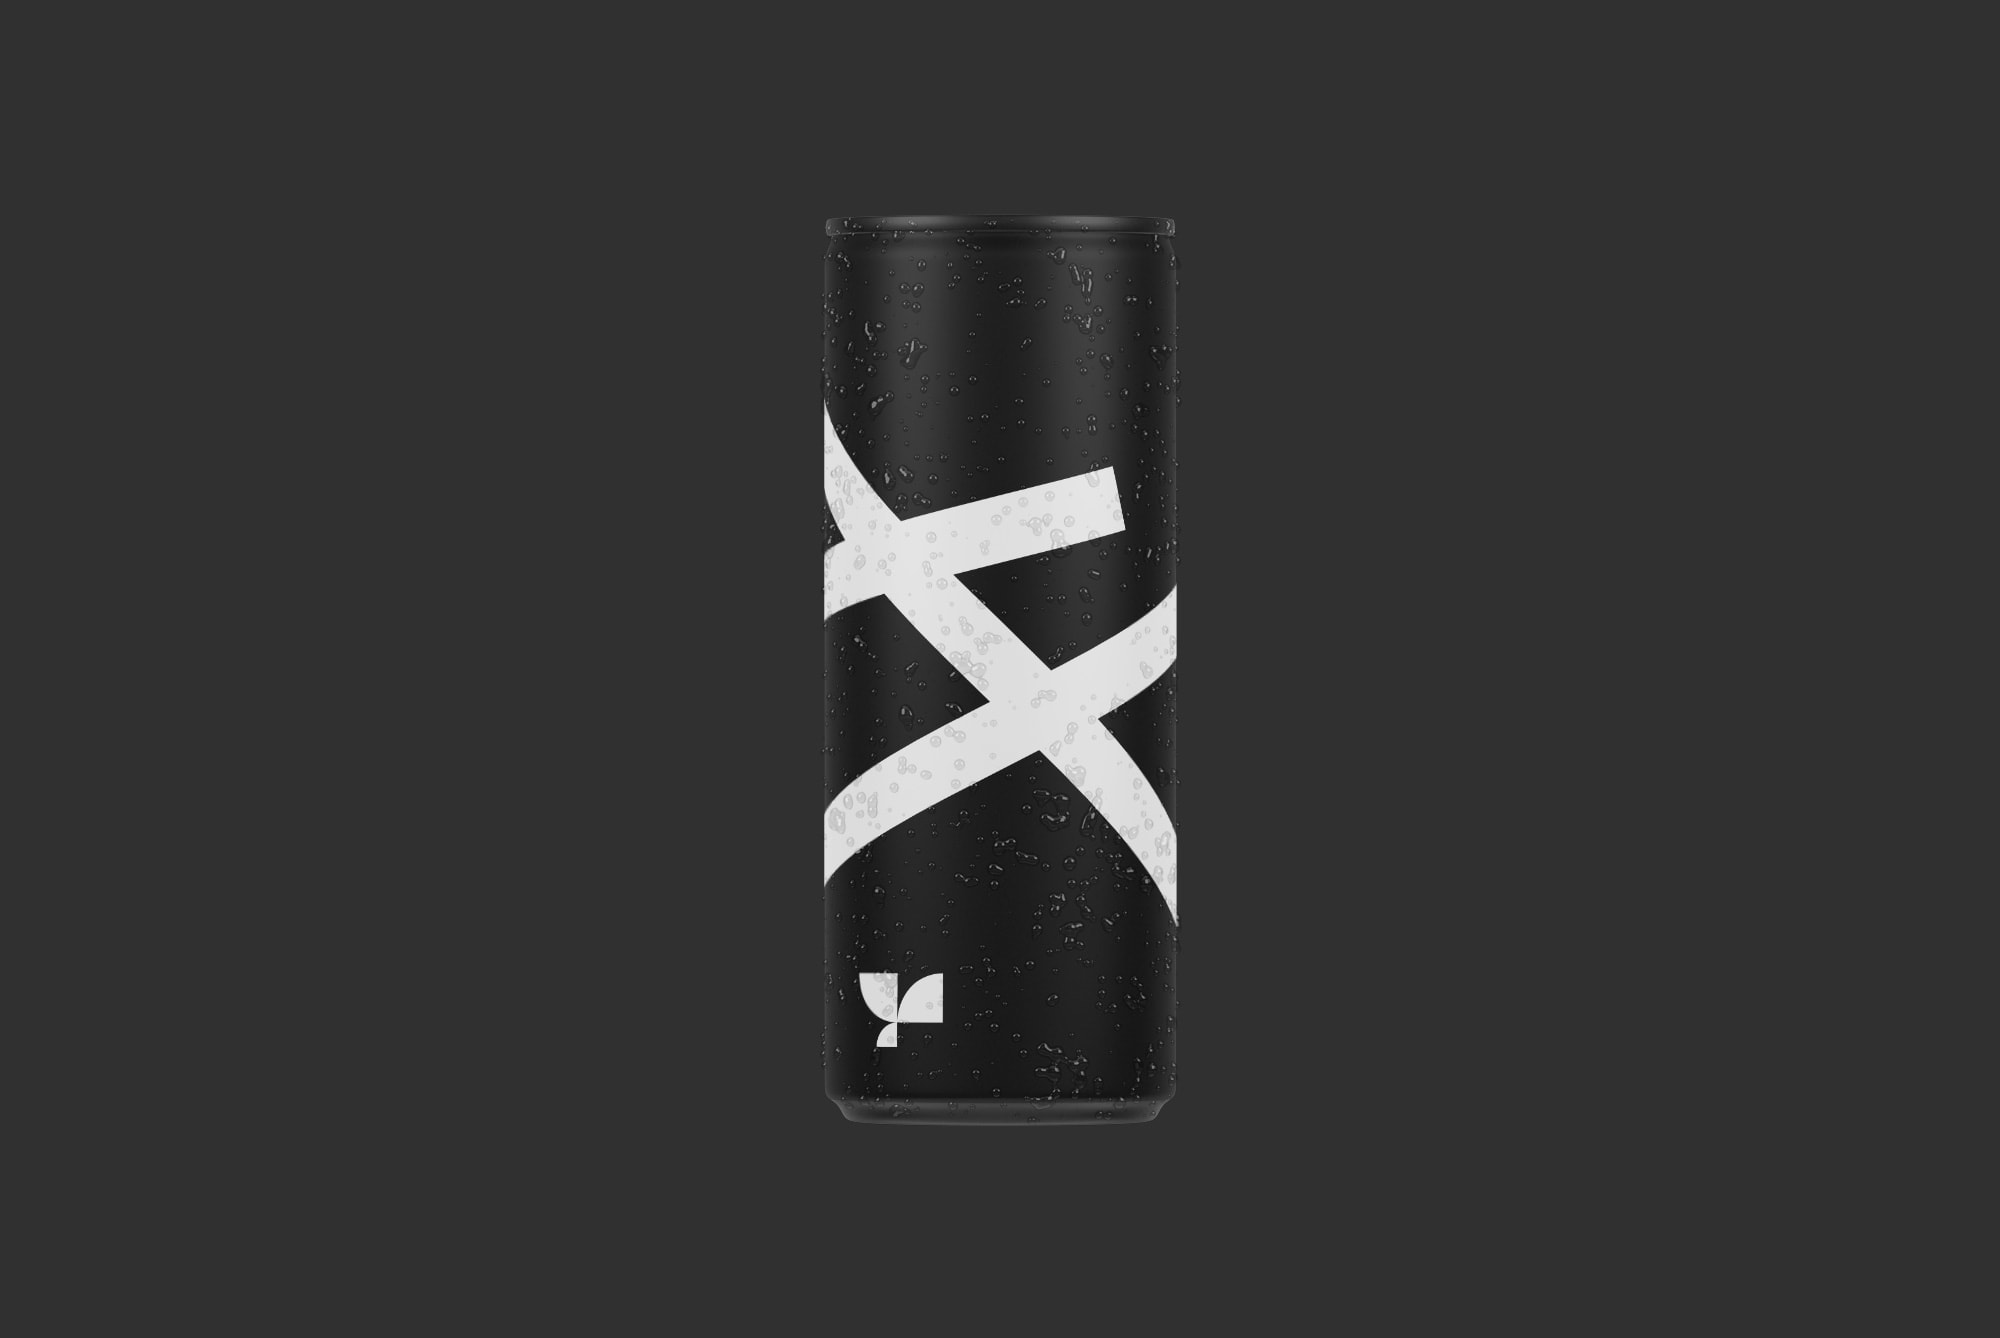 Sleek black beverage can mockup with white abstract design, condensation droplets, dark background, perfect for product packaging design presentations.